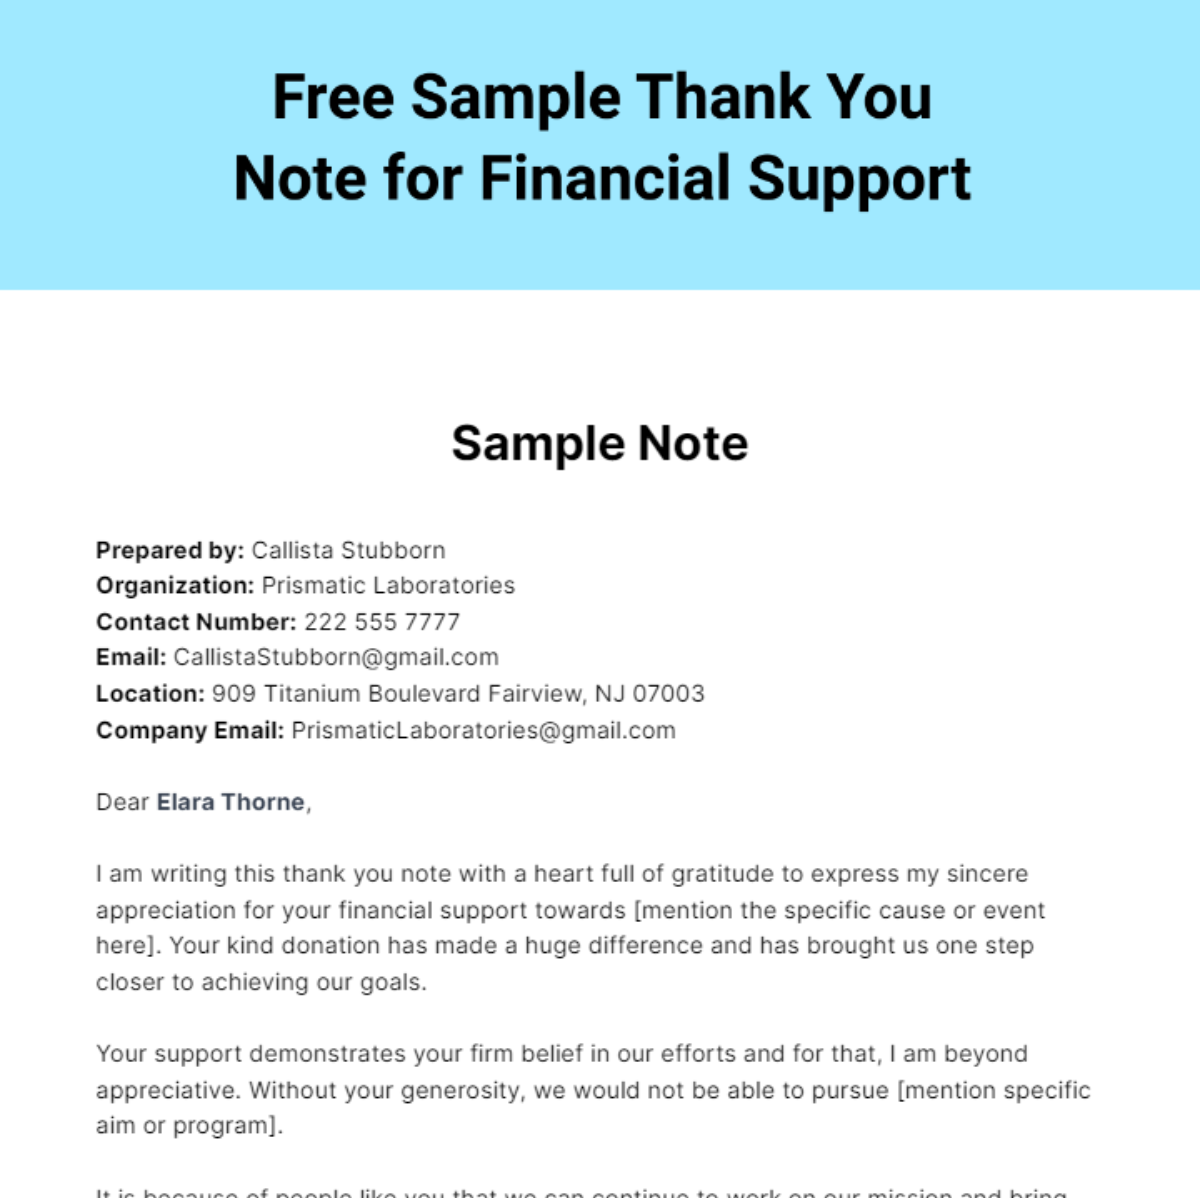 Free Sample Thank you Note for Financial Support Template